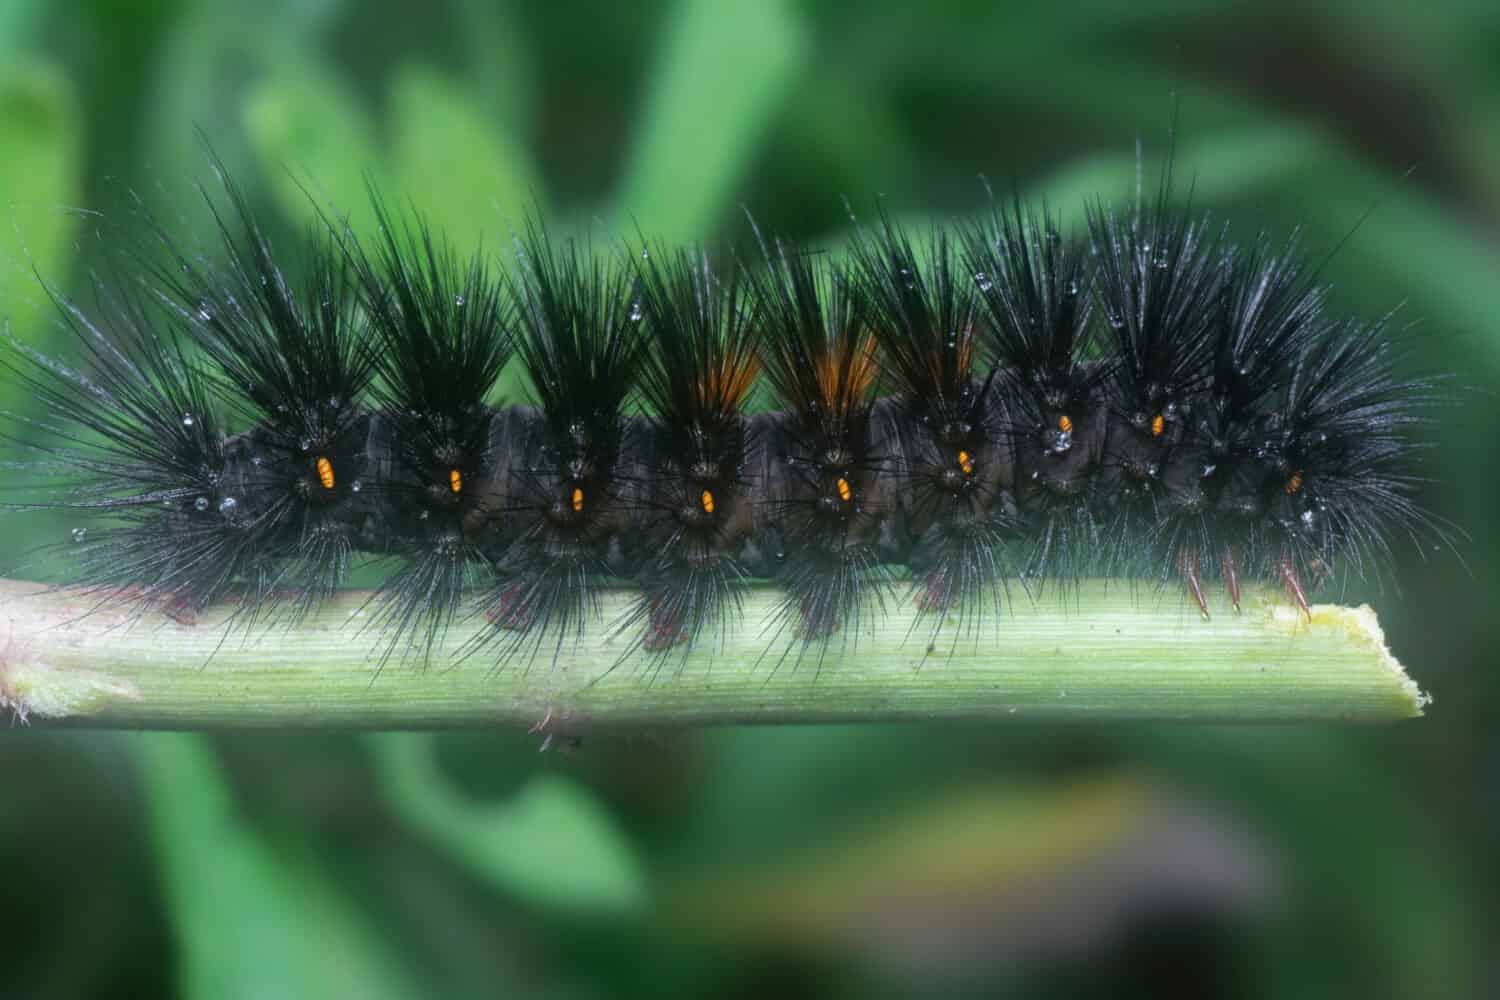 closeup with the Giant Leopard Moth Caterpillar